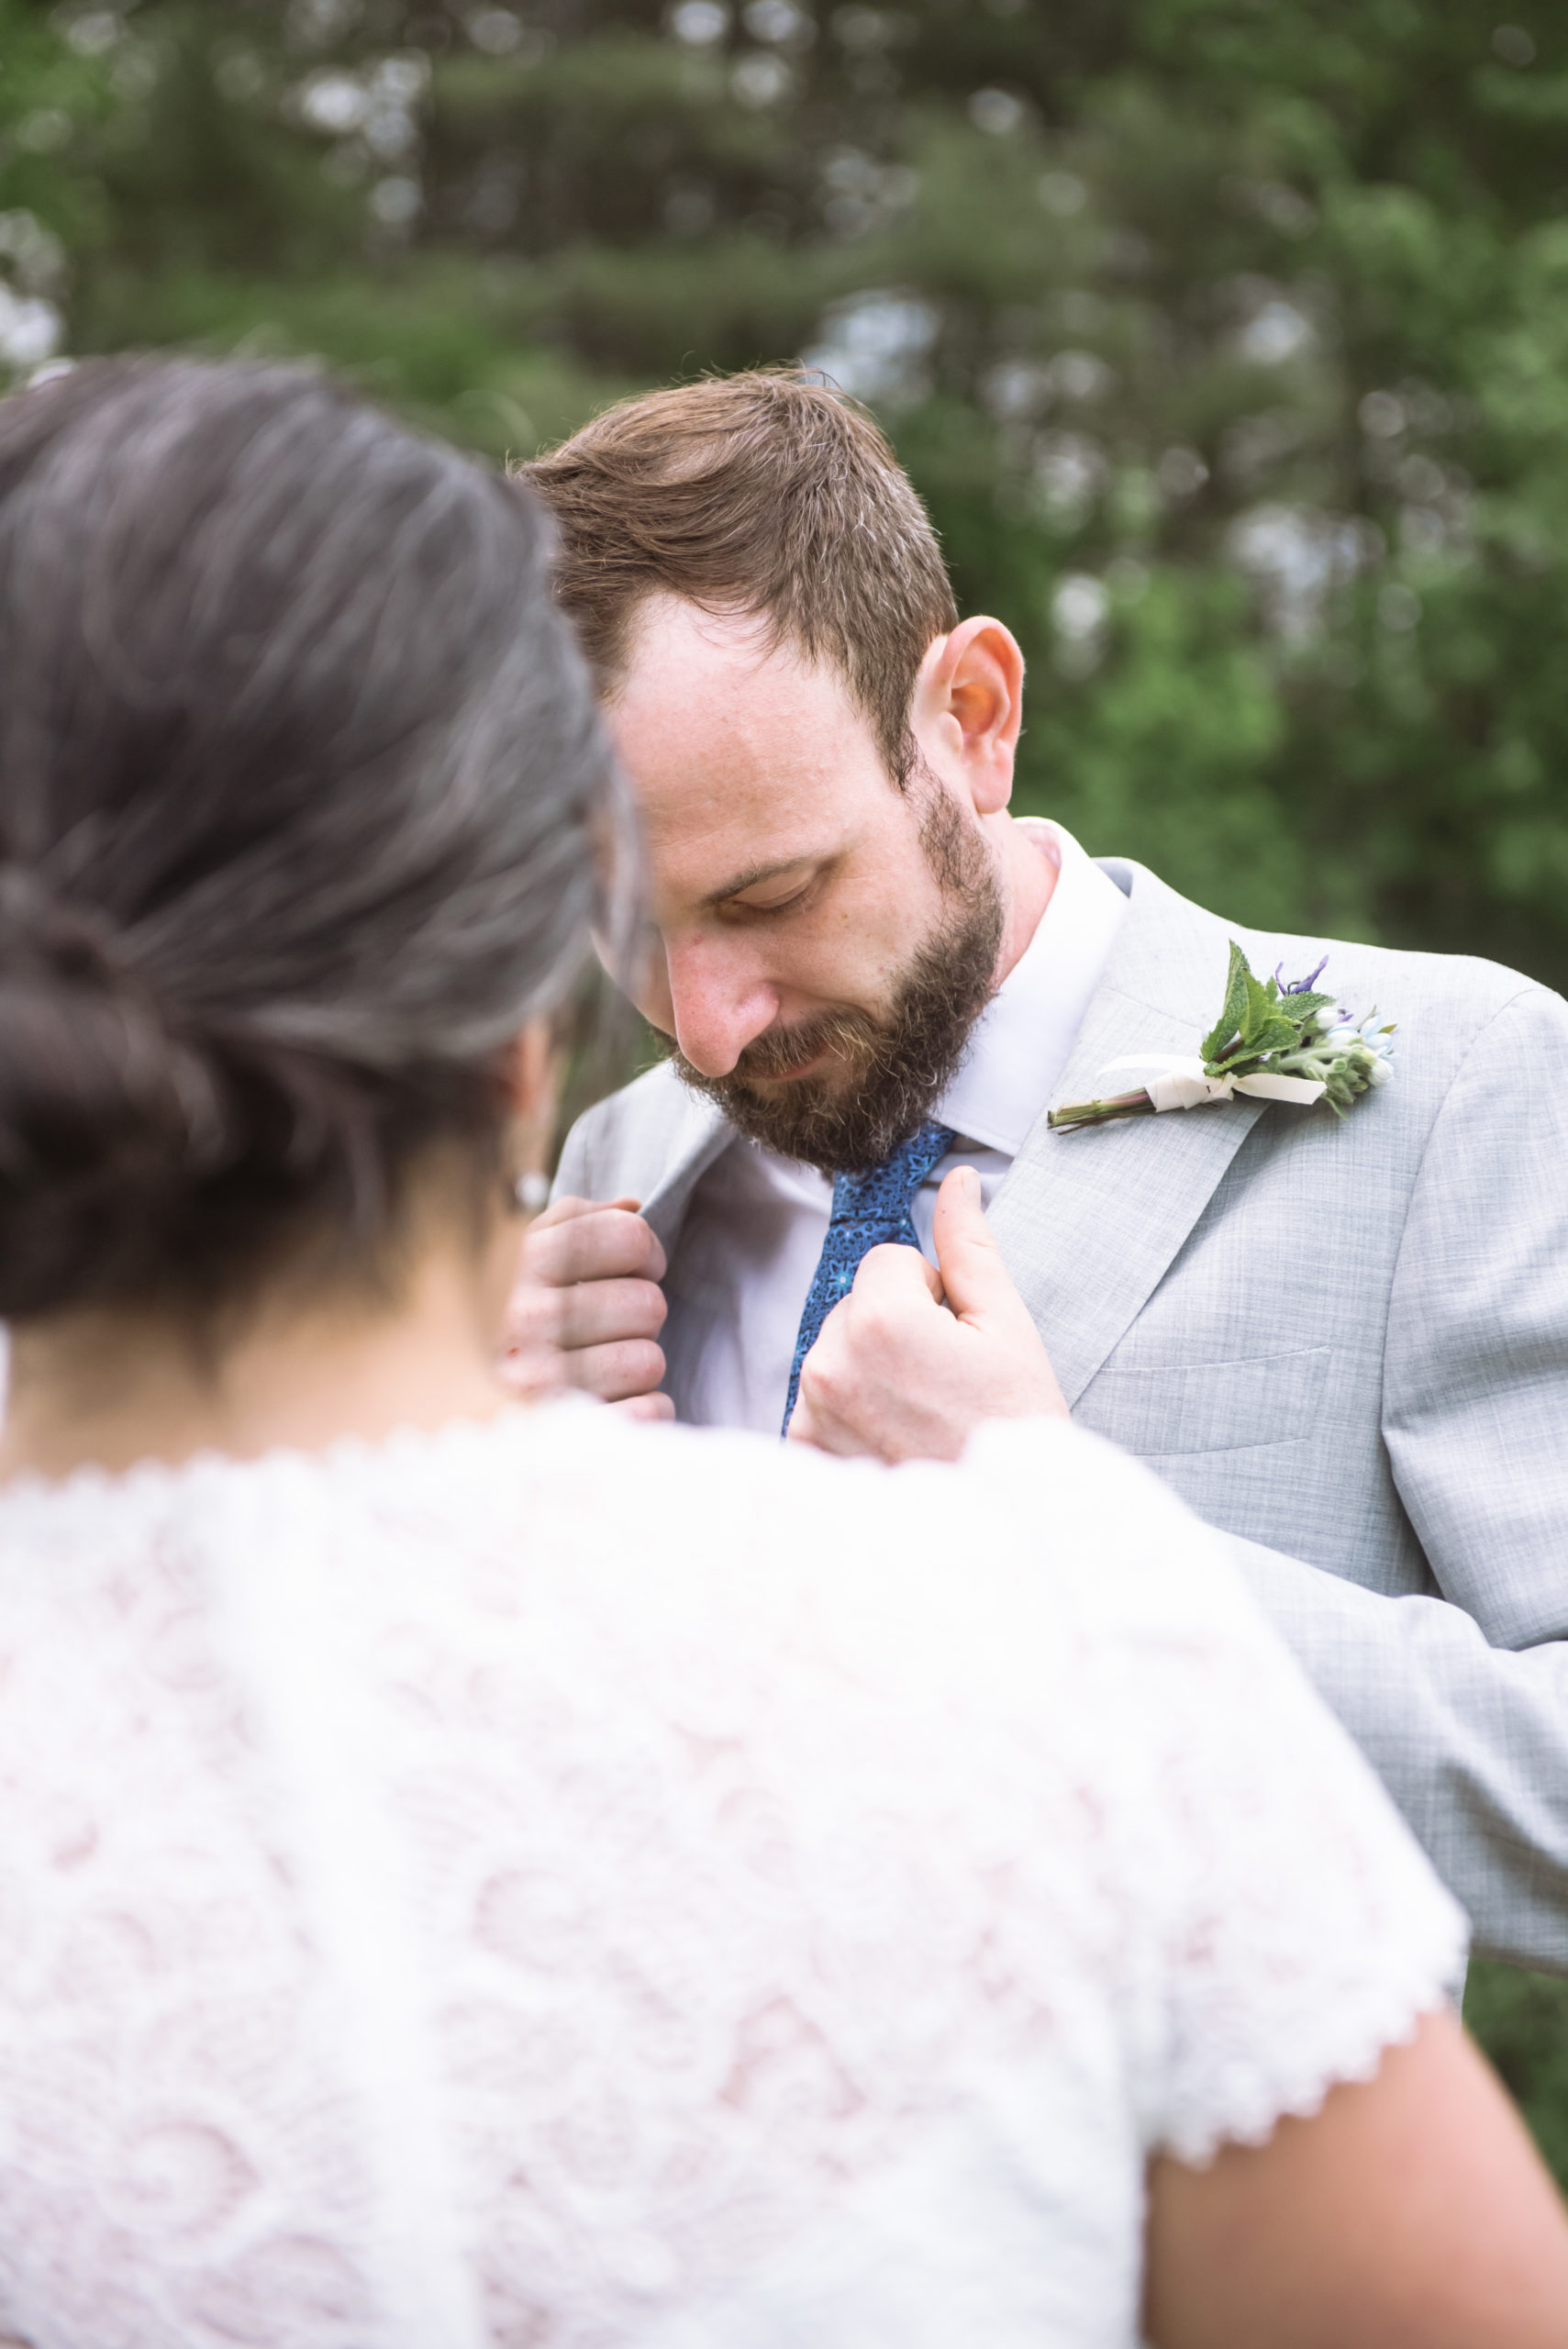 Close up view of the groom looking down, adjusting both sides of the lapels of his suit jacket. He is wearing a blue patterned tie and a boutonniere. The groom is visible behind the bride in the foreground. Her back is to the camera and her hair is in an updo.